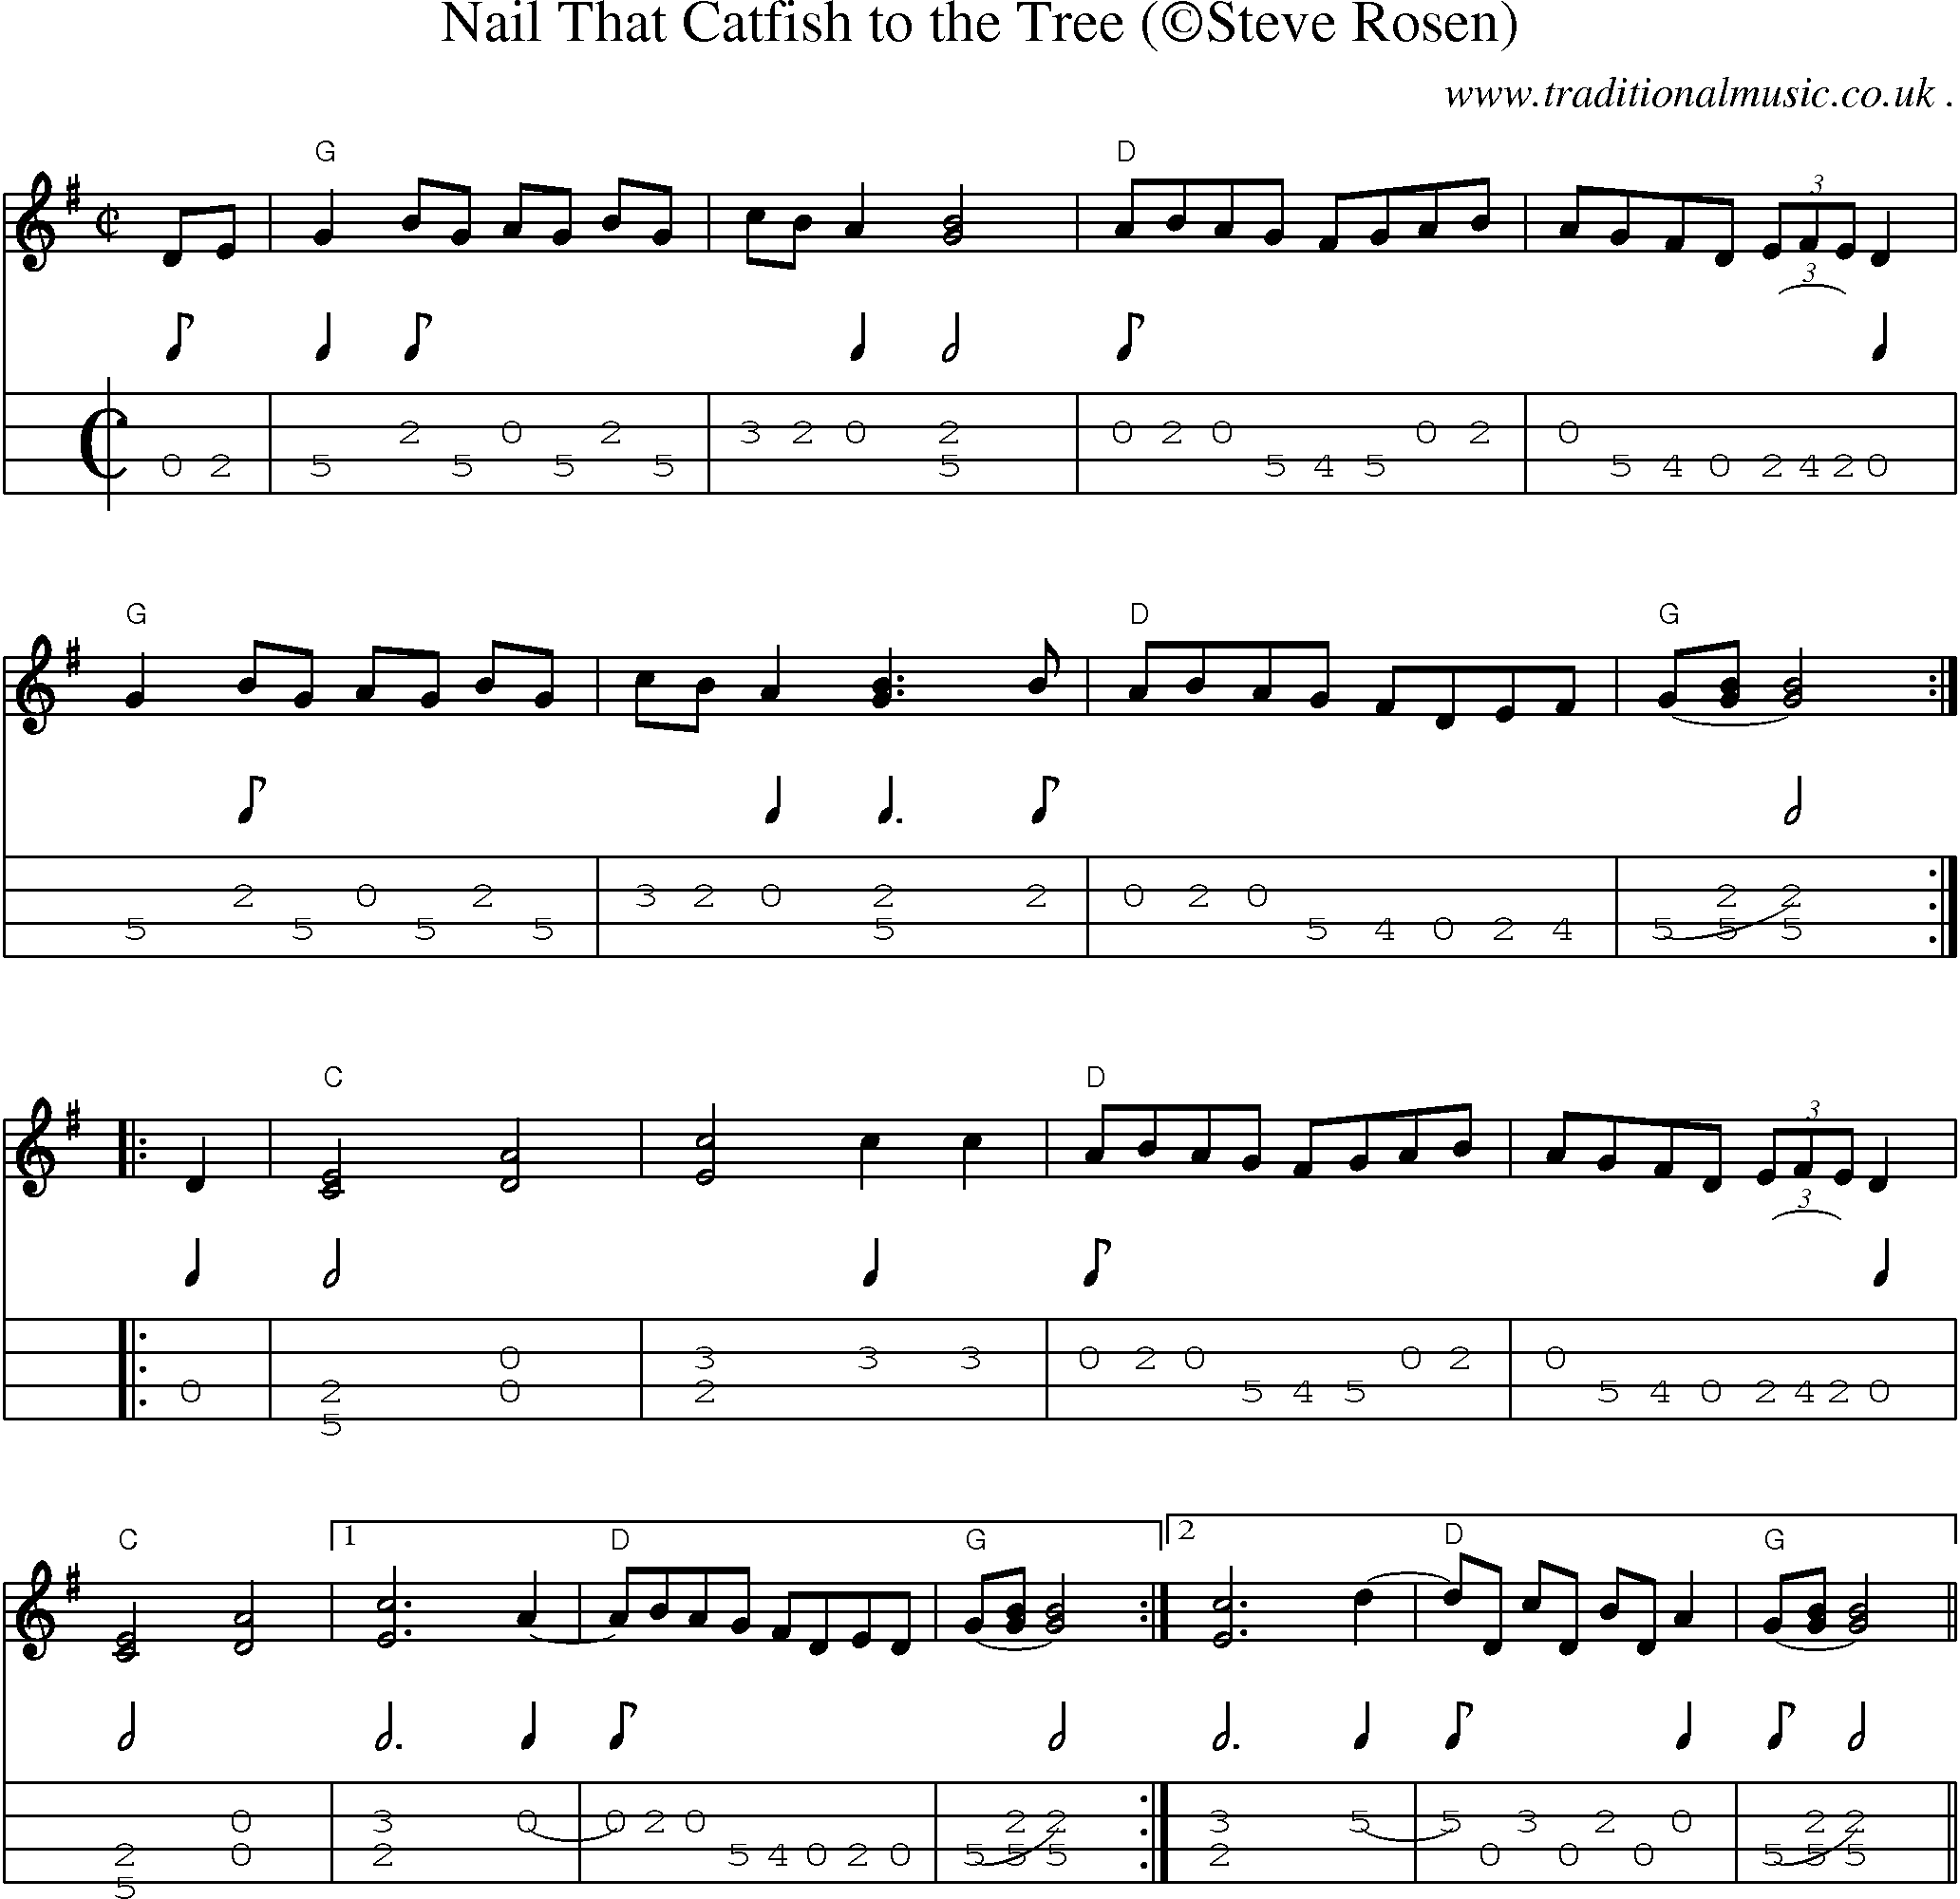 Music Score and Guitar Tabs for Nail That Catfish To The Tree1